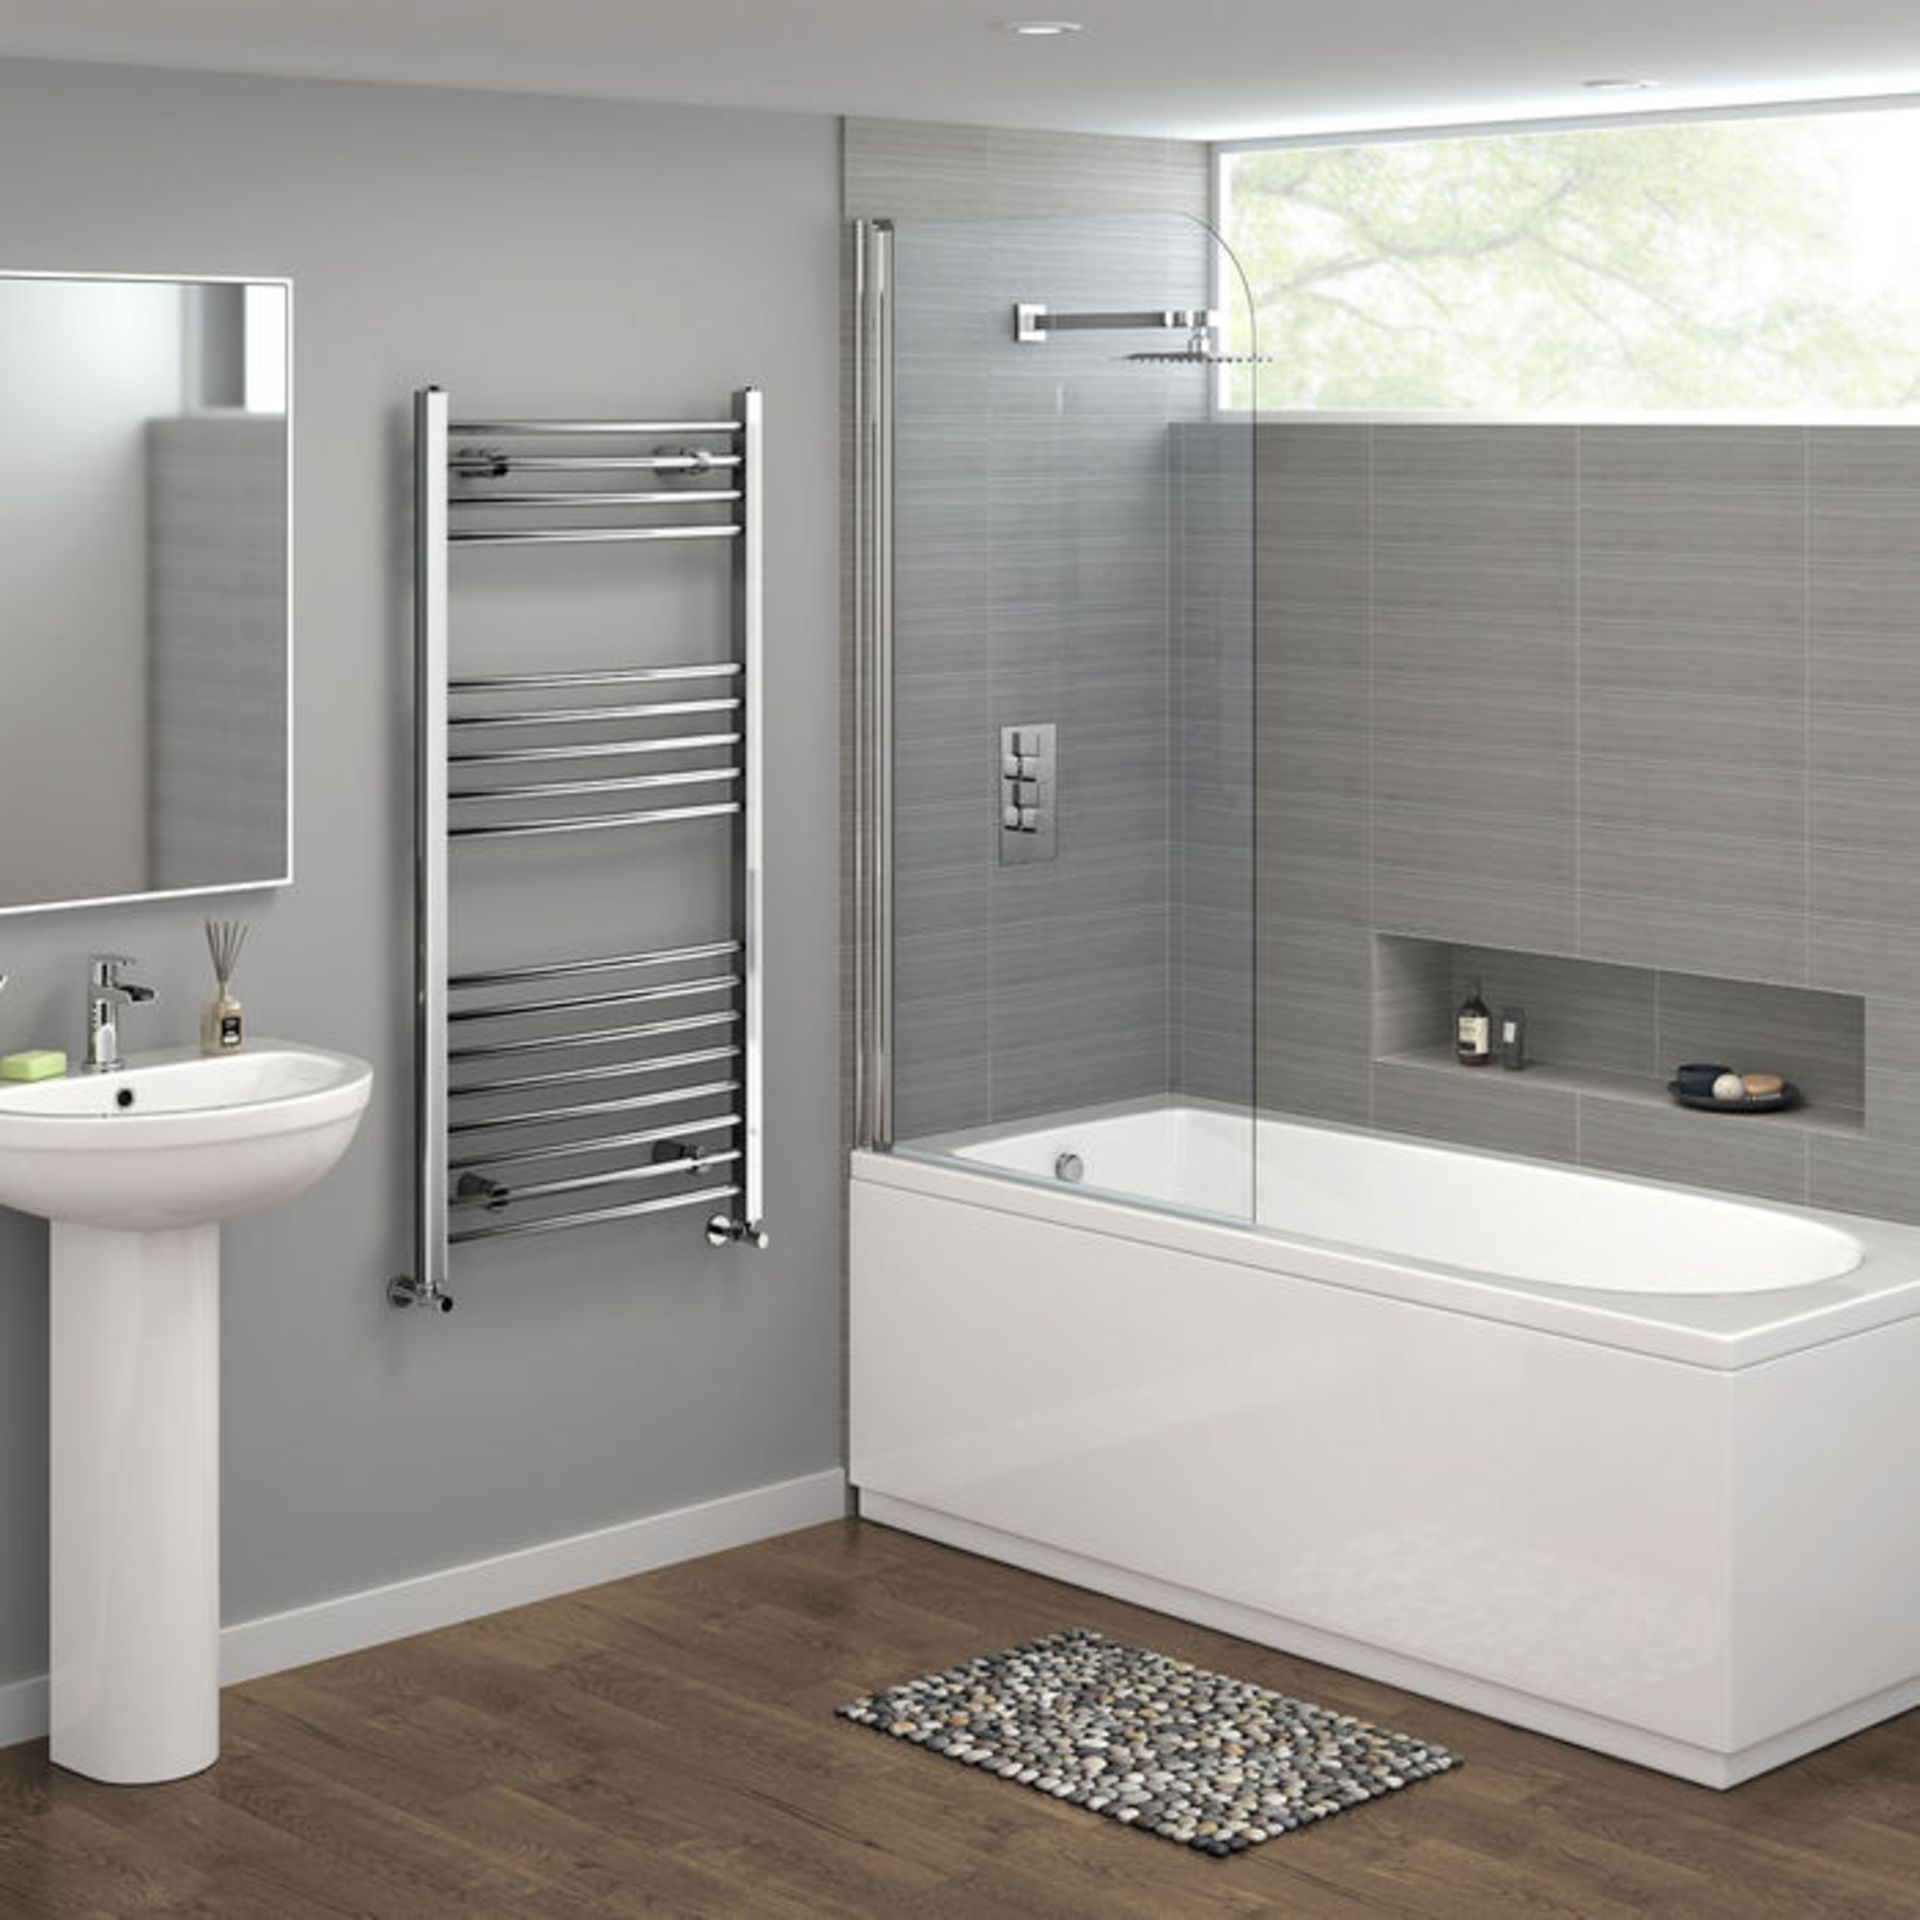 1200x600mm - 20mm Tubes - Chrome Curved Rail Ladder Towel Radiator.Nc1200600.Made From Chrome P... - Image 2 of 2